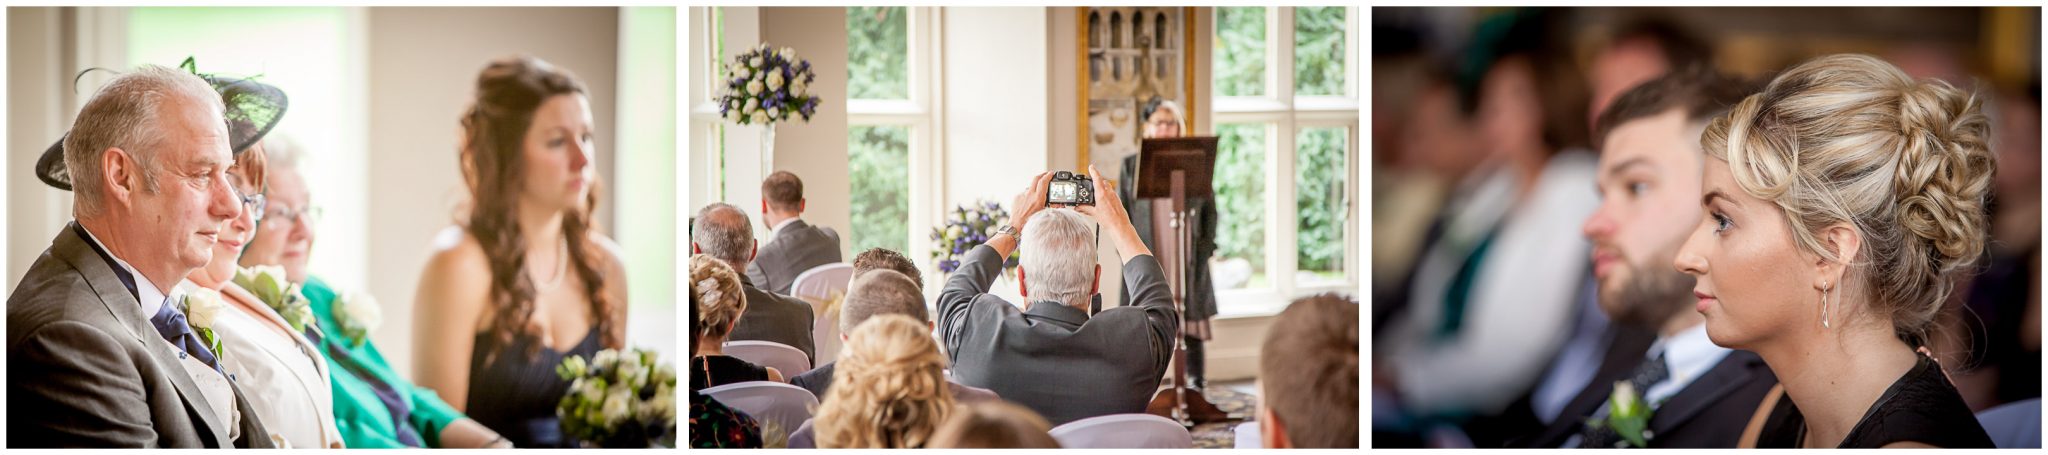 Audleys Wood wedding photography guests watch a reading